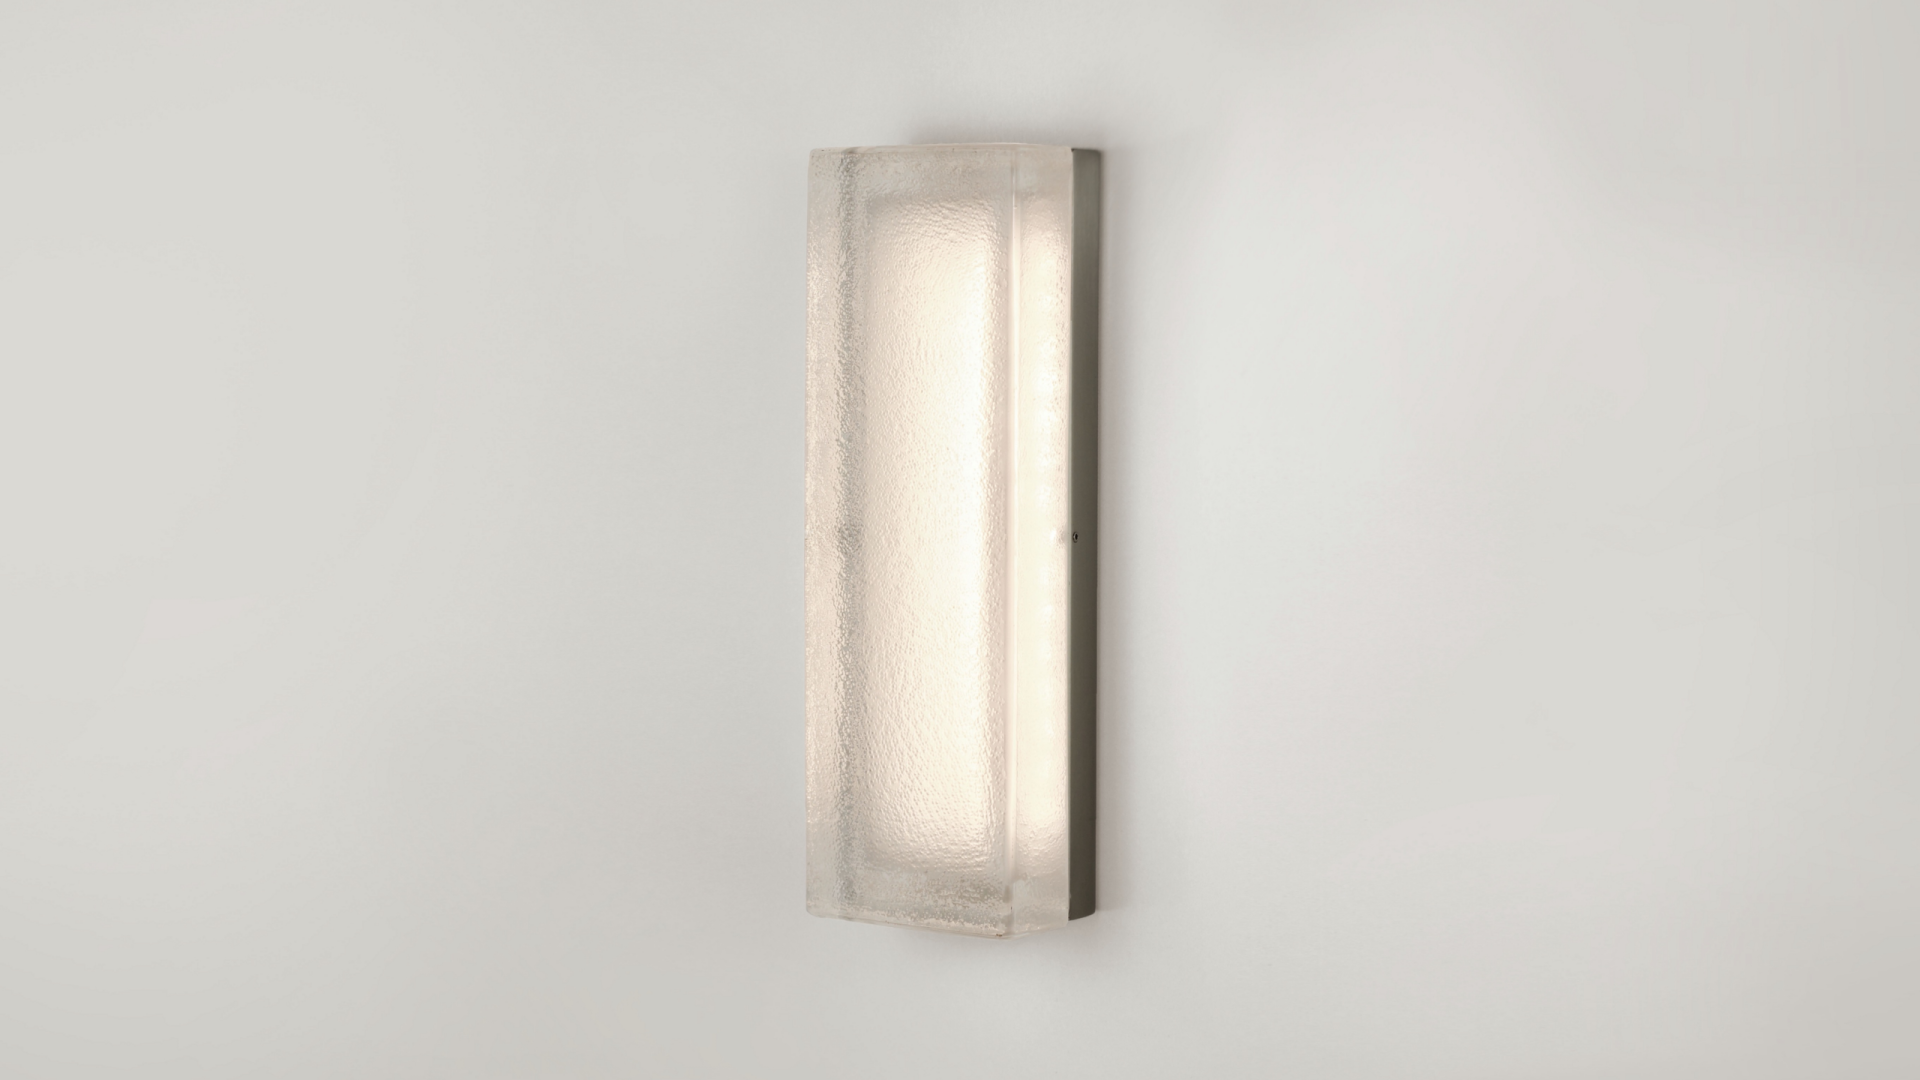 Textured glass luminaire shown wall mounted in a vertical configuration.